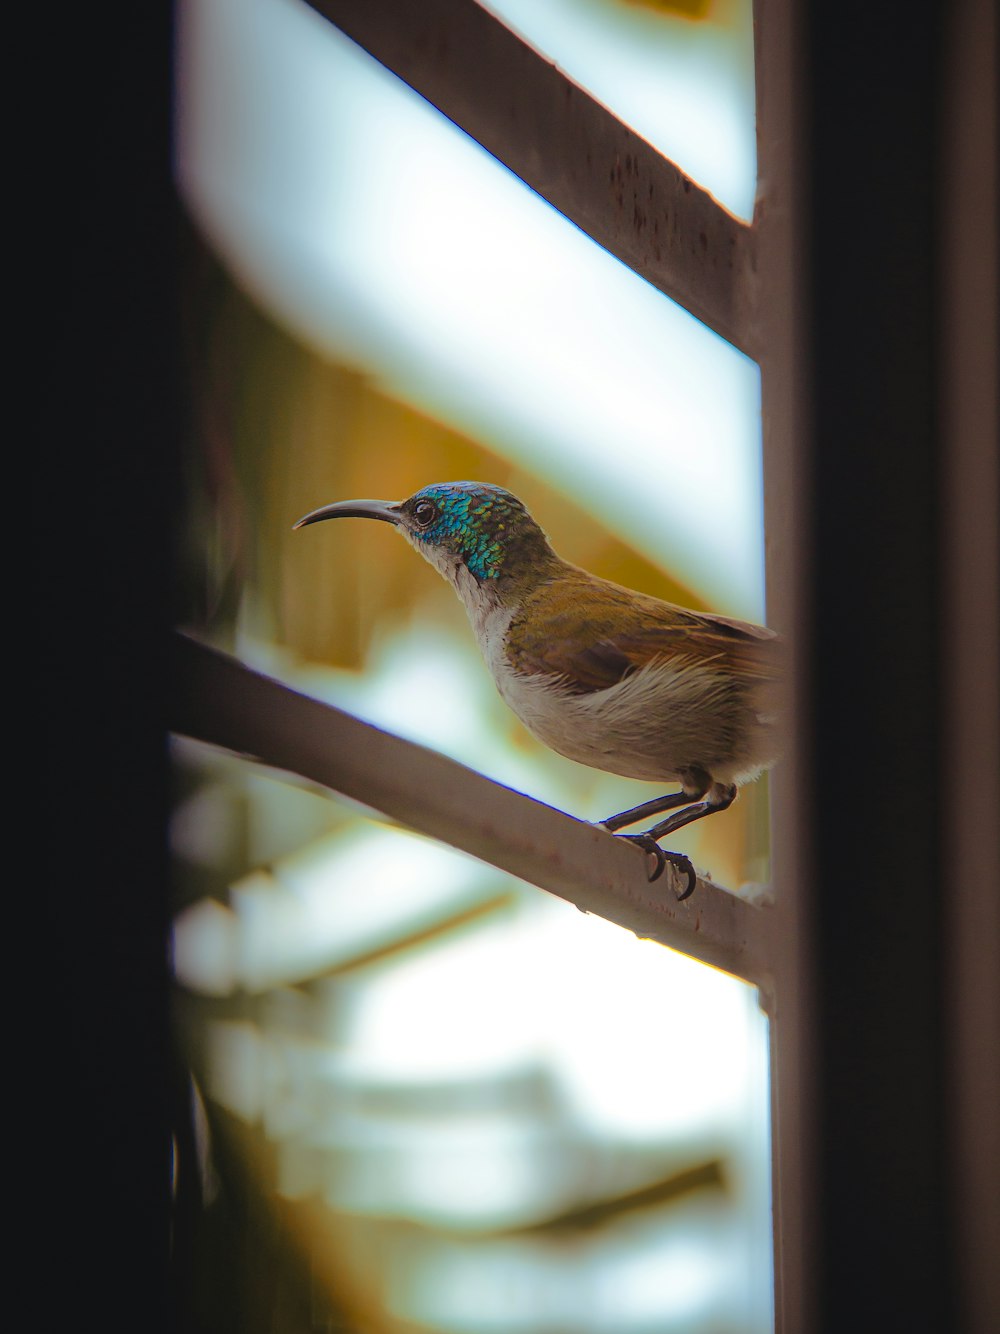 a small bird perched on a window sill